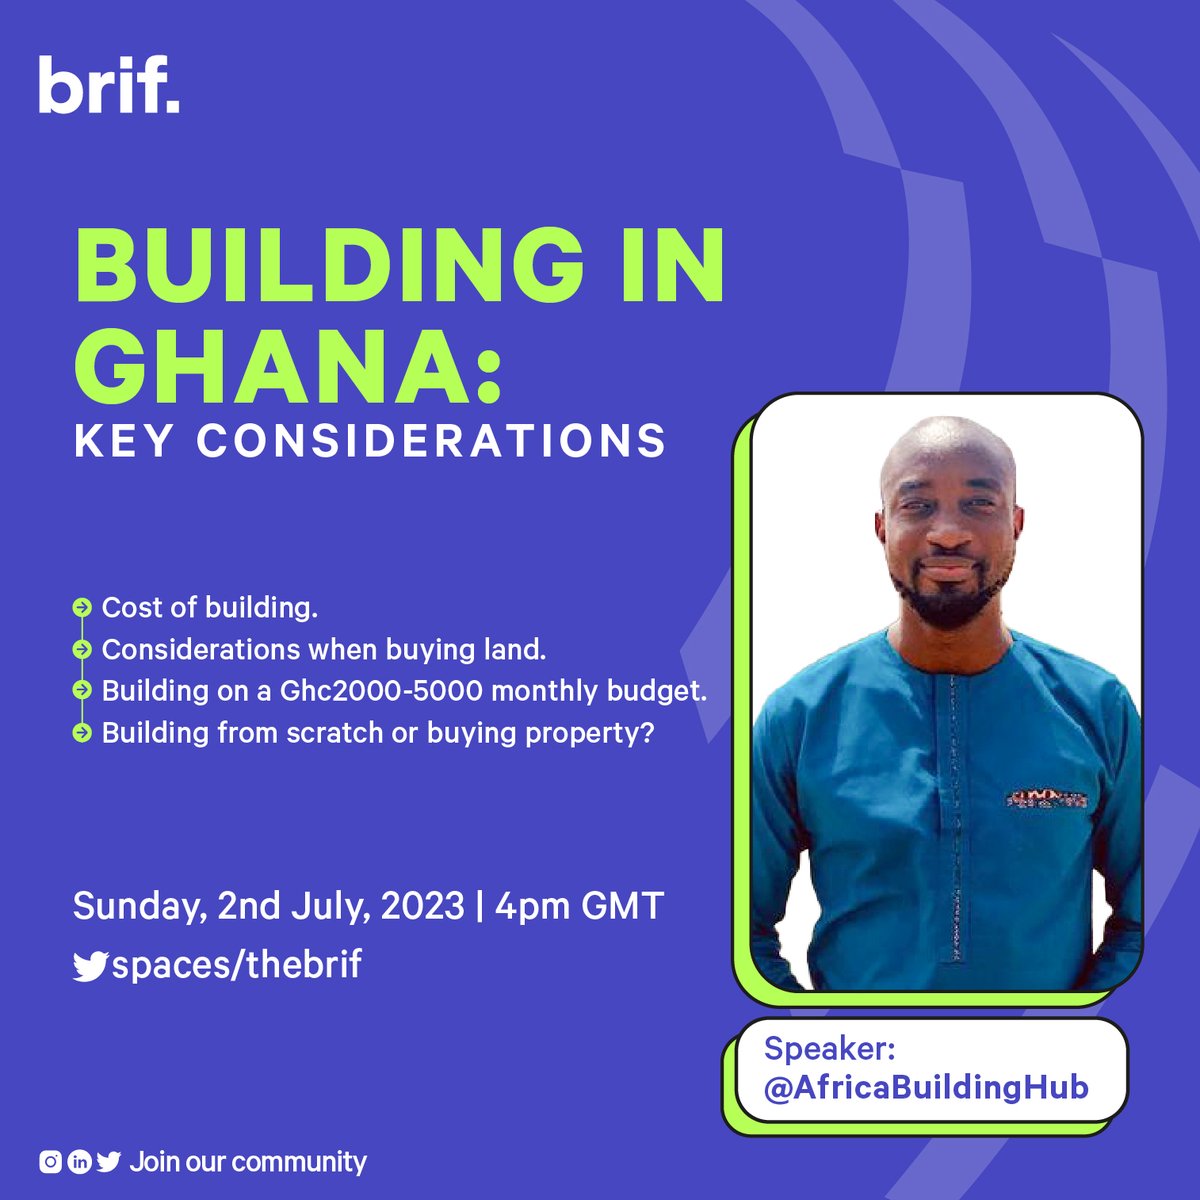 Set a reminder for upcoming Space

Building In Ghana; Key Considerations

1. Cost of Building
2. Considerations when buying Land
3. Building on Ghc 2000-5000 monthly budget
4. Building from scratch or buying finished property

#buildinginGhana

twitter.com/theBrifNetwork…